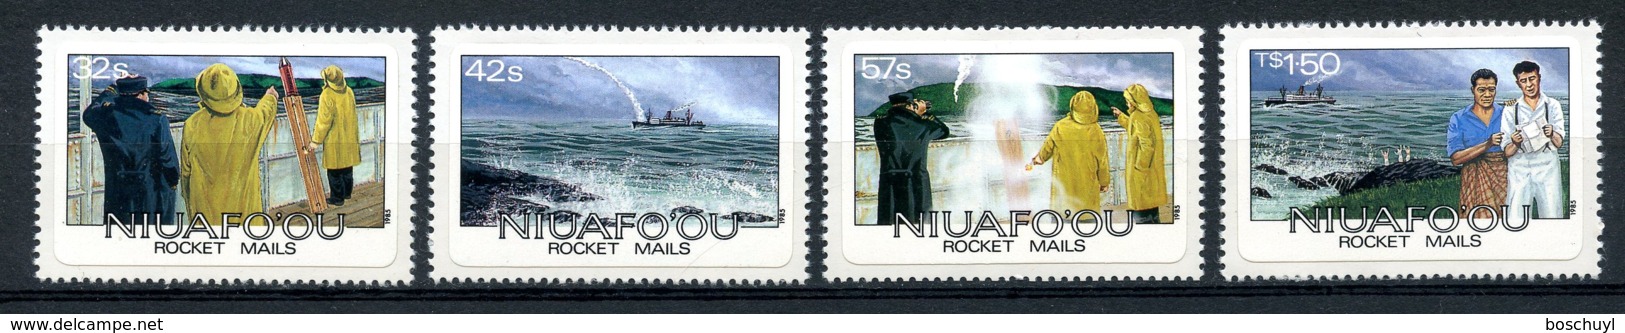 Niuafo'ou, Tin Can Island, 1985, Rocket Mail, Boats, MNH, Michel 61-64 - Andere-Oceanië